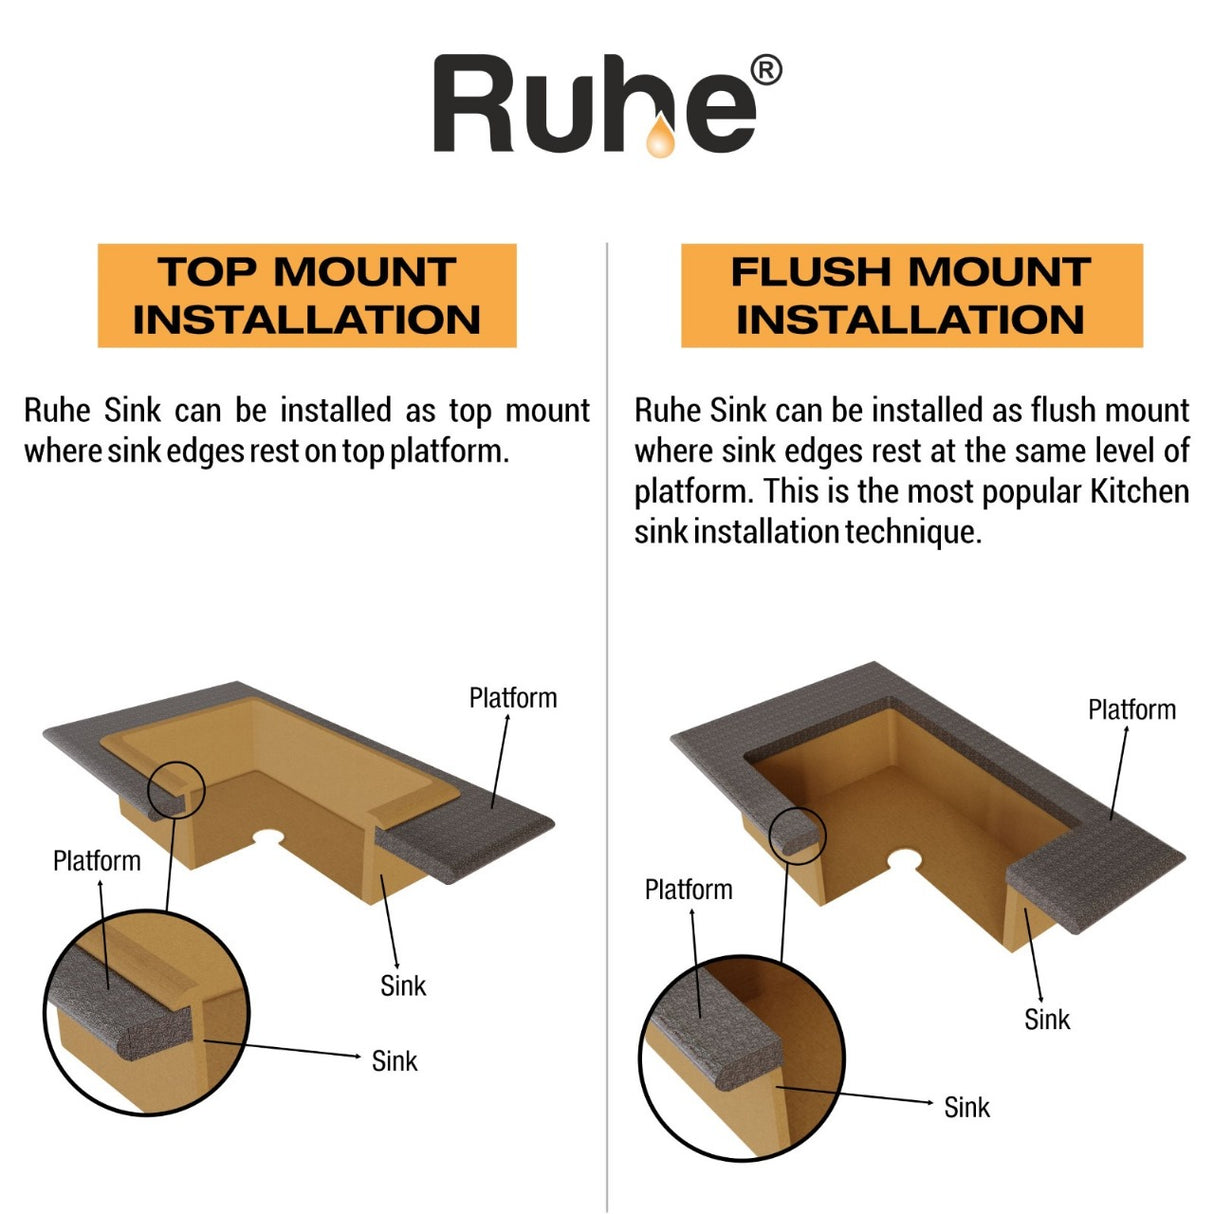 Quartz Single Bowl with Drainboard Kitchen Sink - Choco Brown (36 x 18 x 9 inches) - by Ruhe®